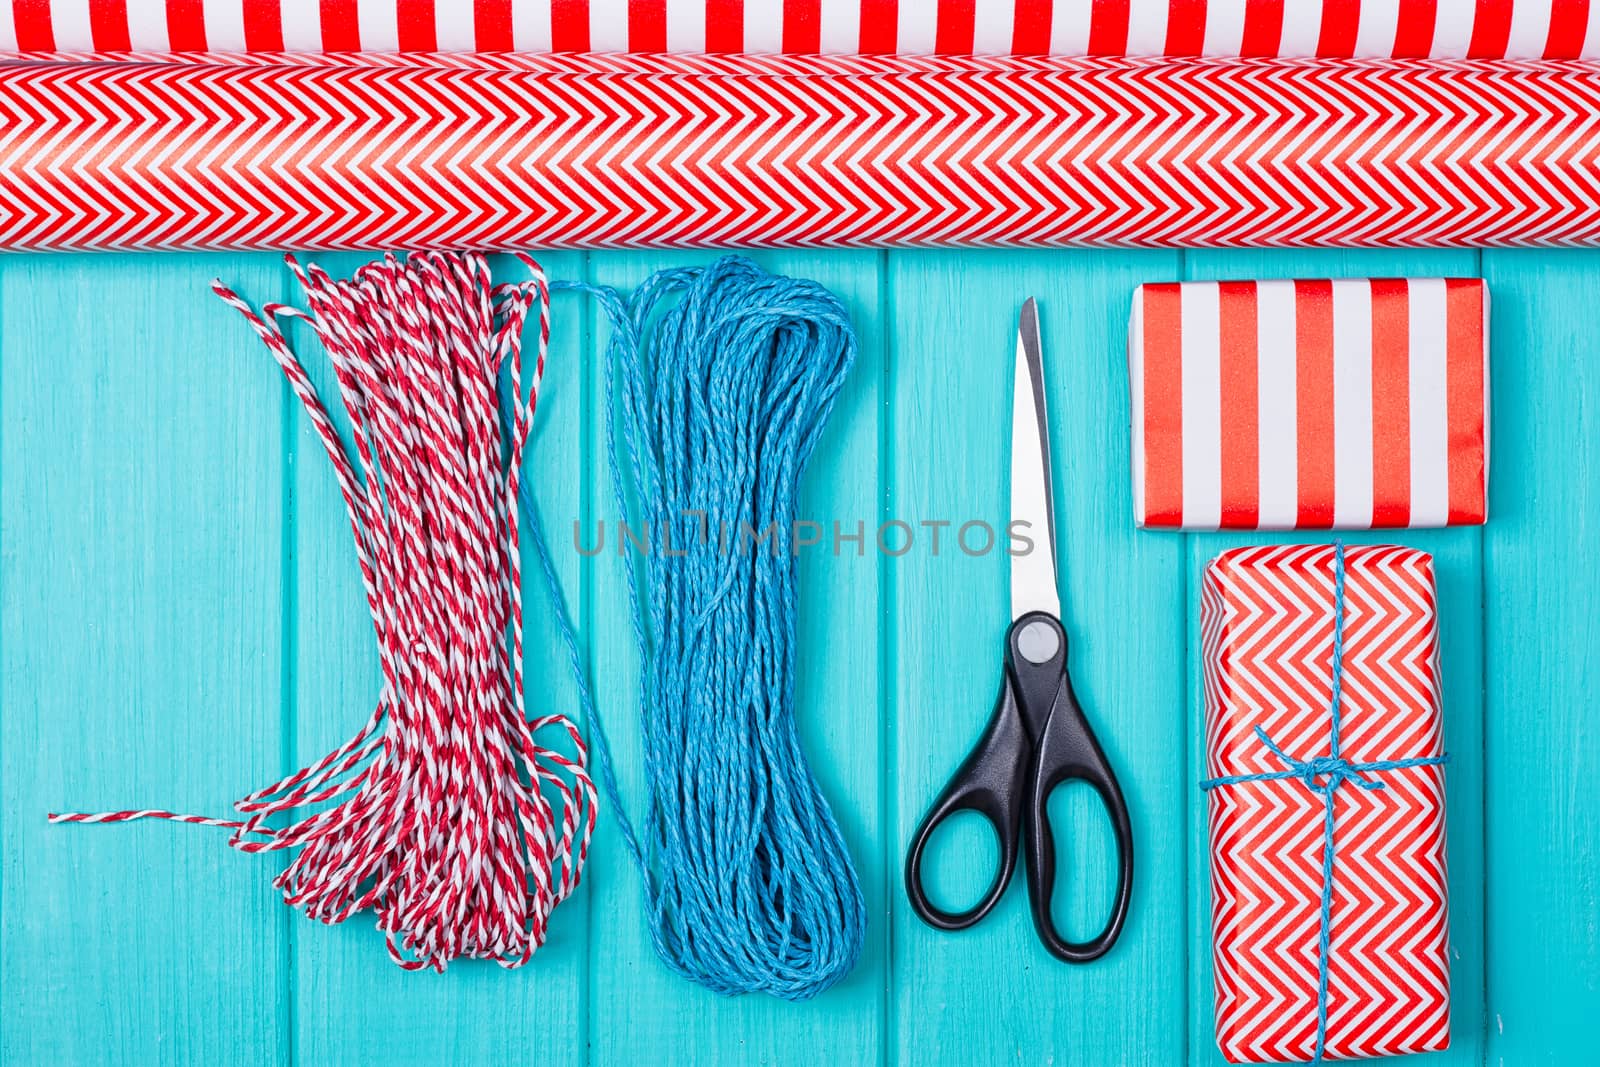 Christmas Gift Wrapping Party Time with Colorful Paper, Ribbon Bows, Scissors and Tape on Cyan Blue Shabby Chic Wood Board Background Space for copy, text